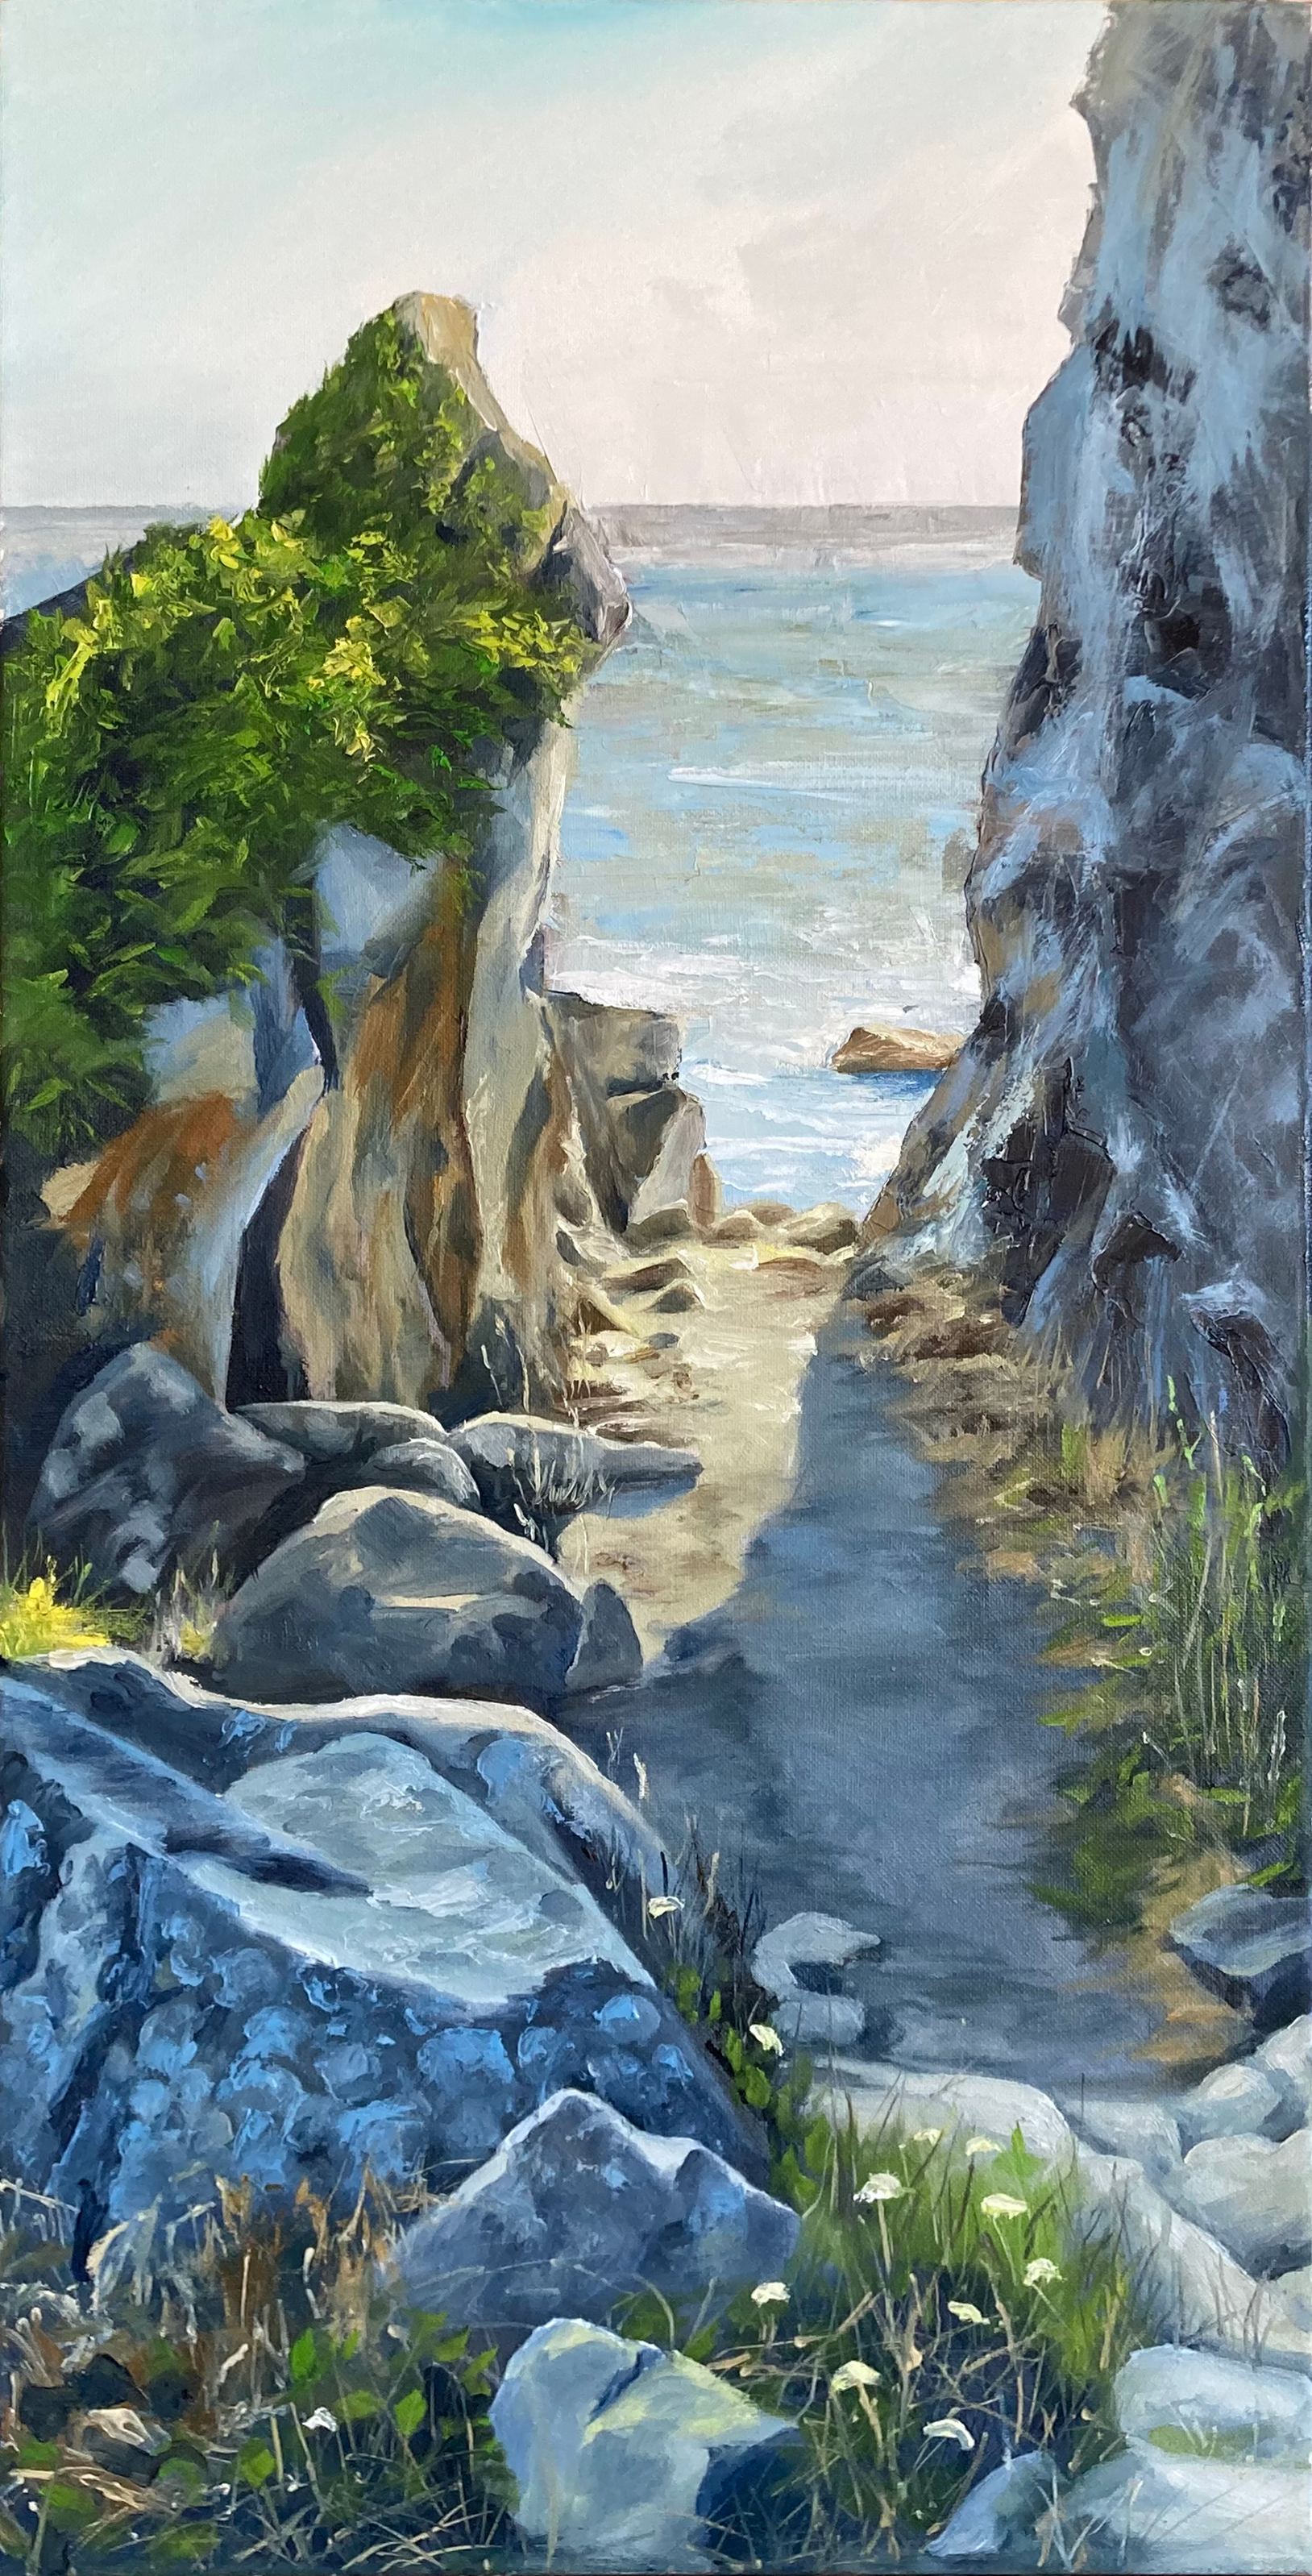 Passage to the Sea. Oil on Canvas, by Tom Wheeler